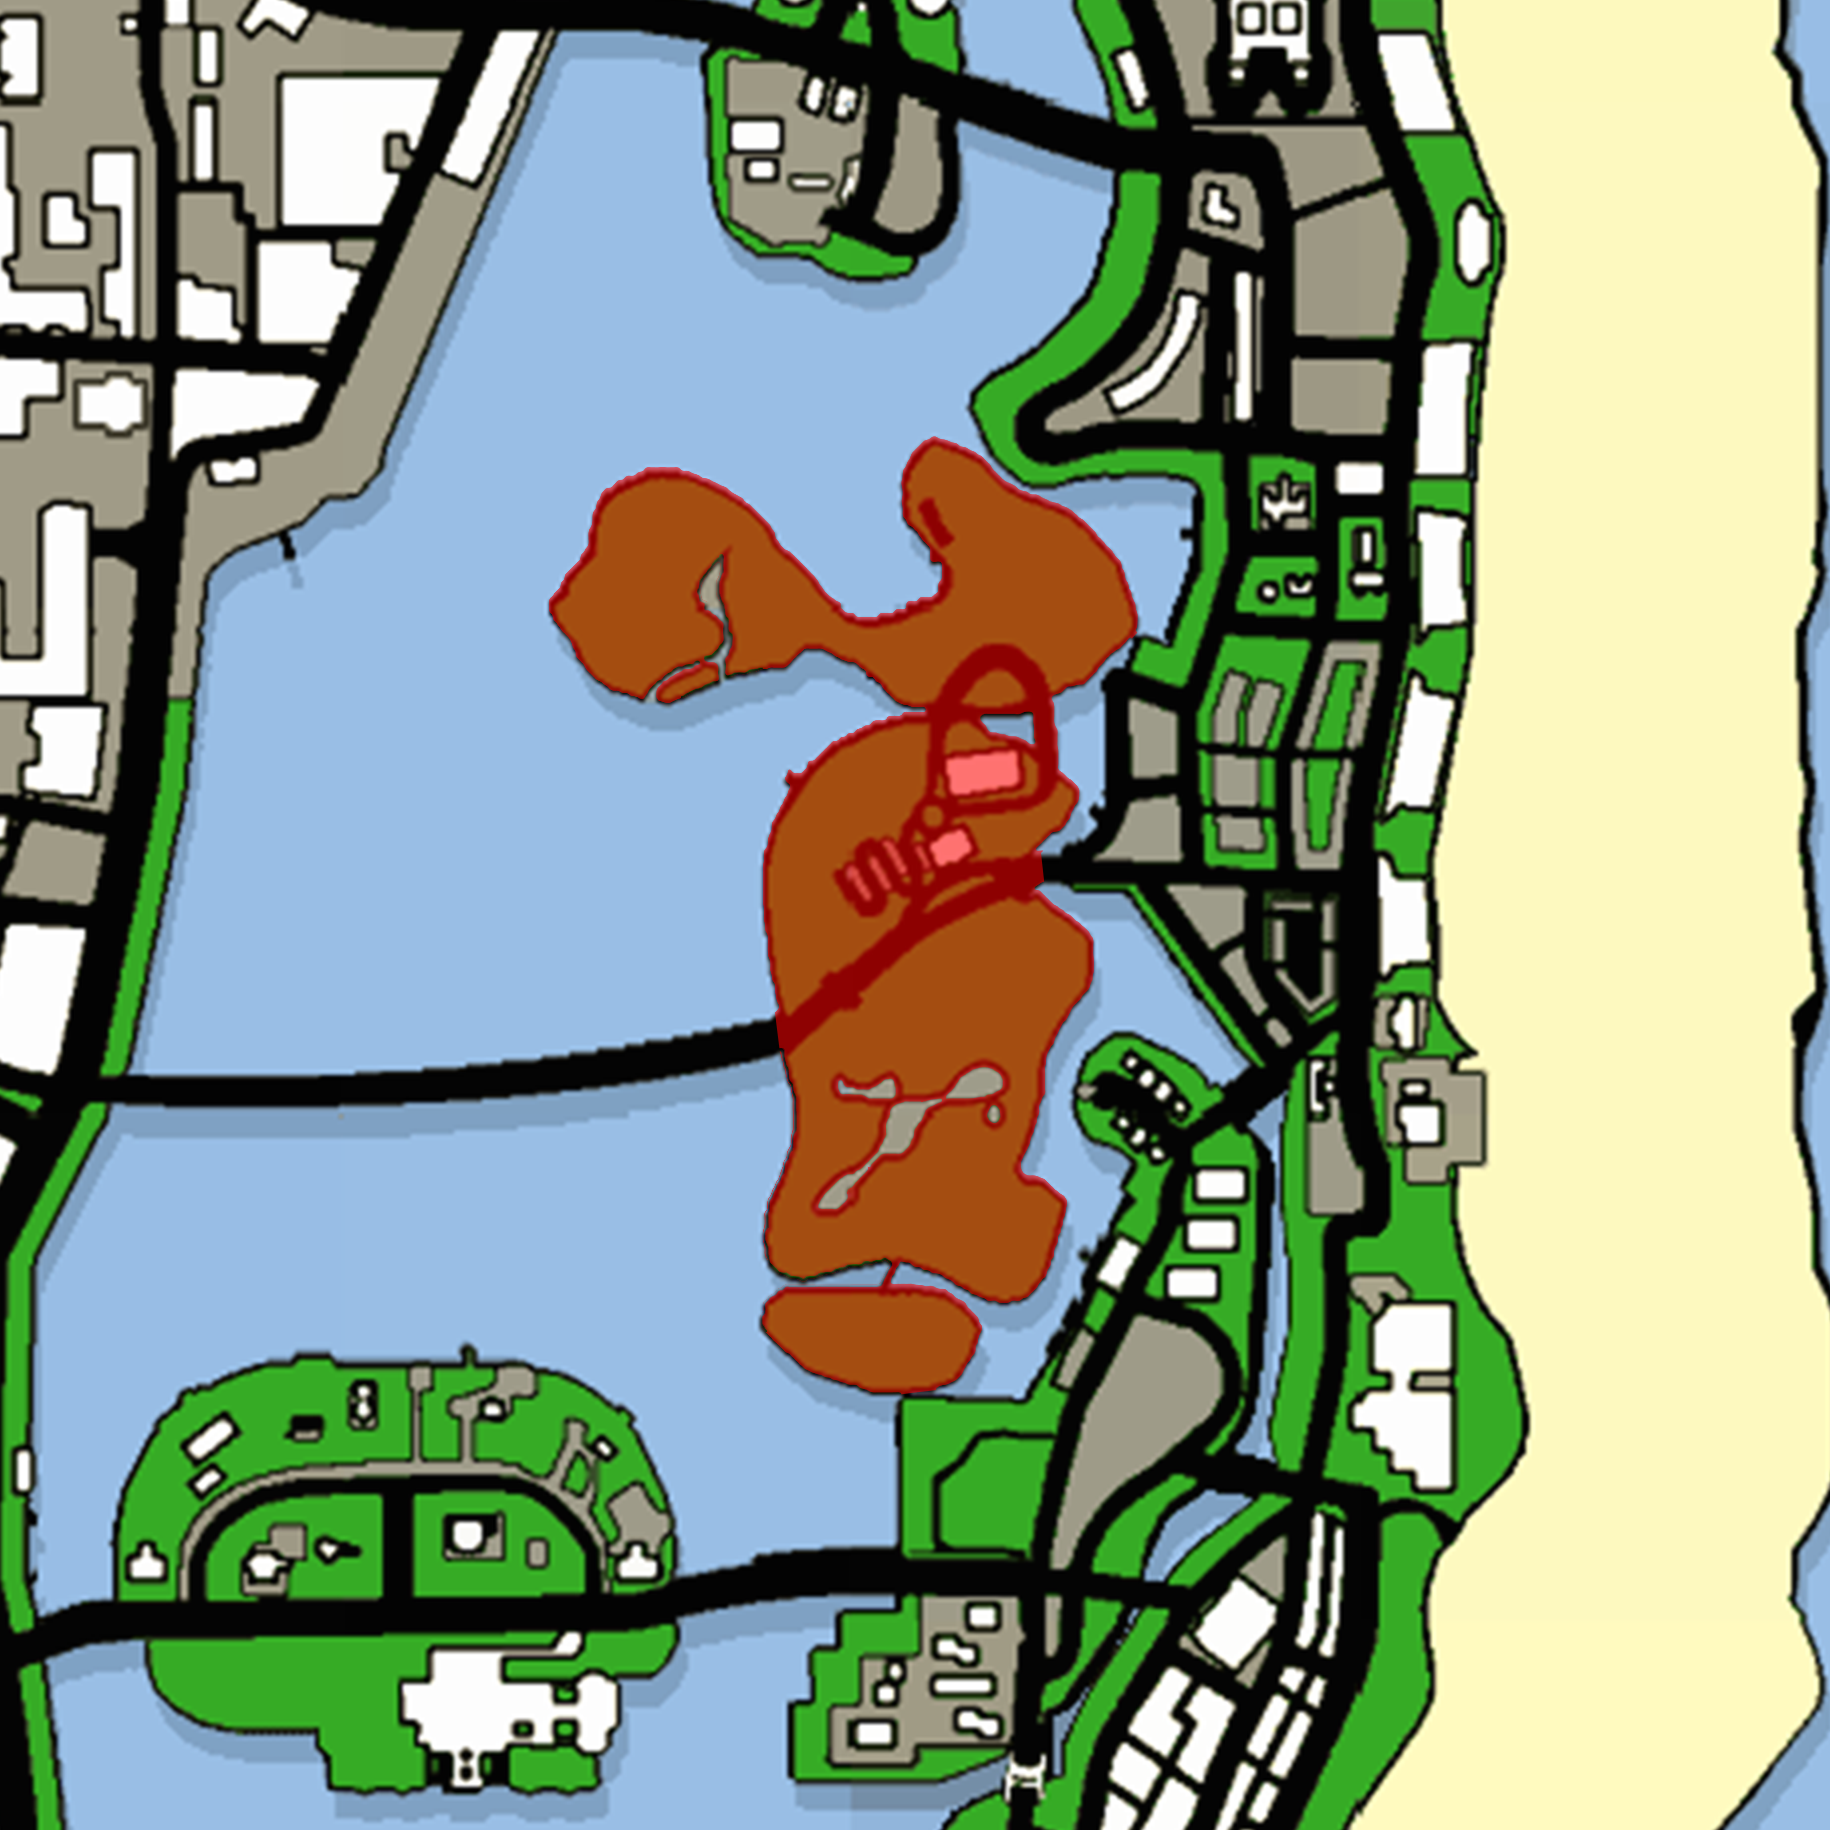 vice city hidden packages map